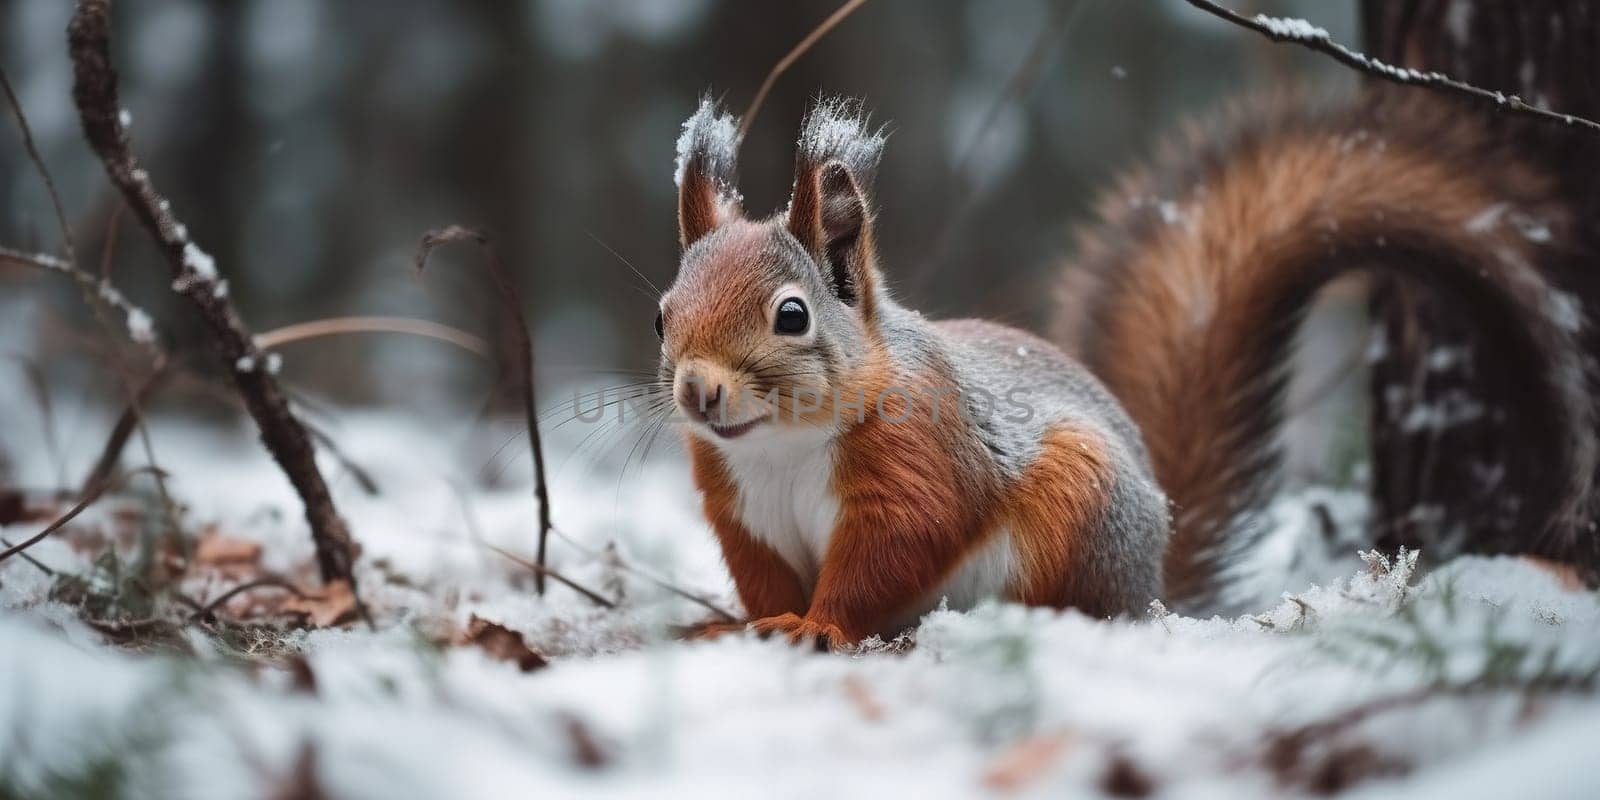 Cute Red Wild Squirrel In Winter In The Forest, Animal In Natural Habitat